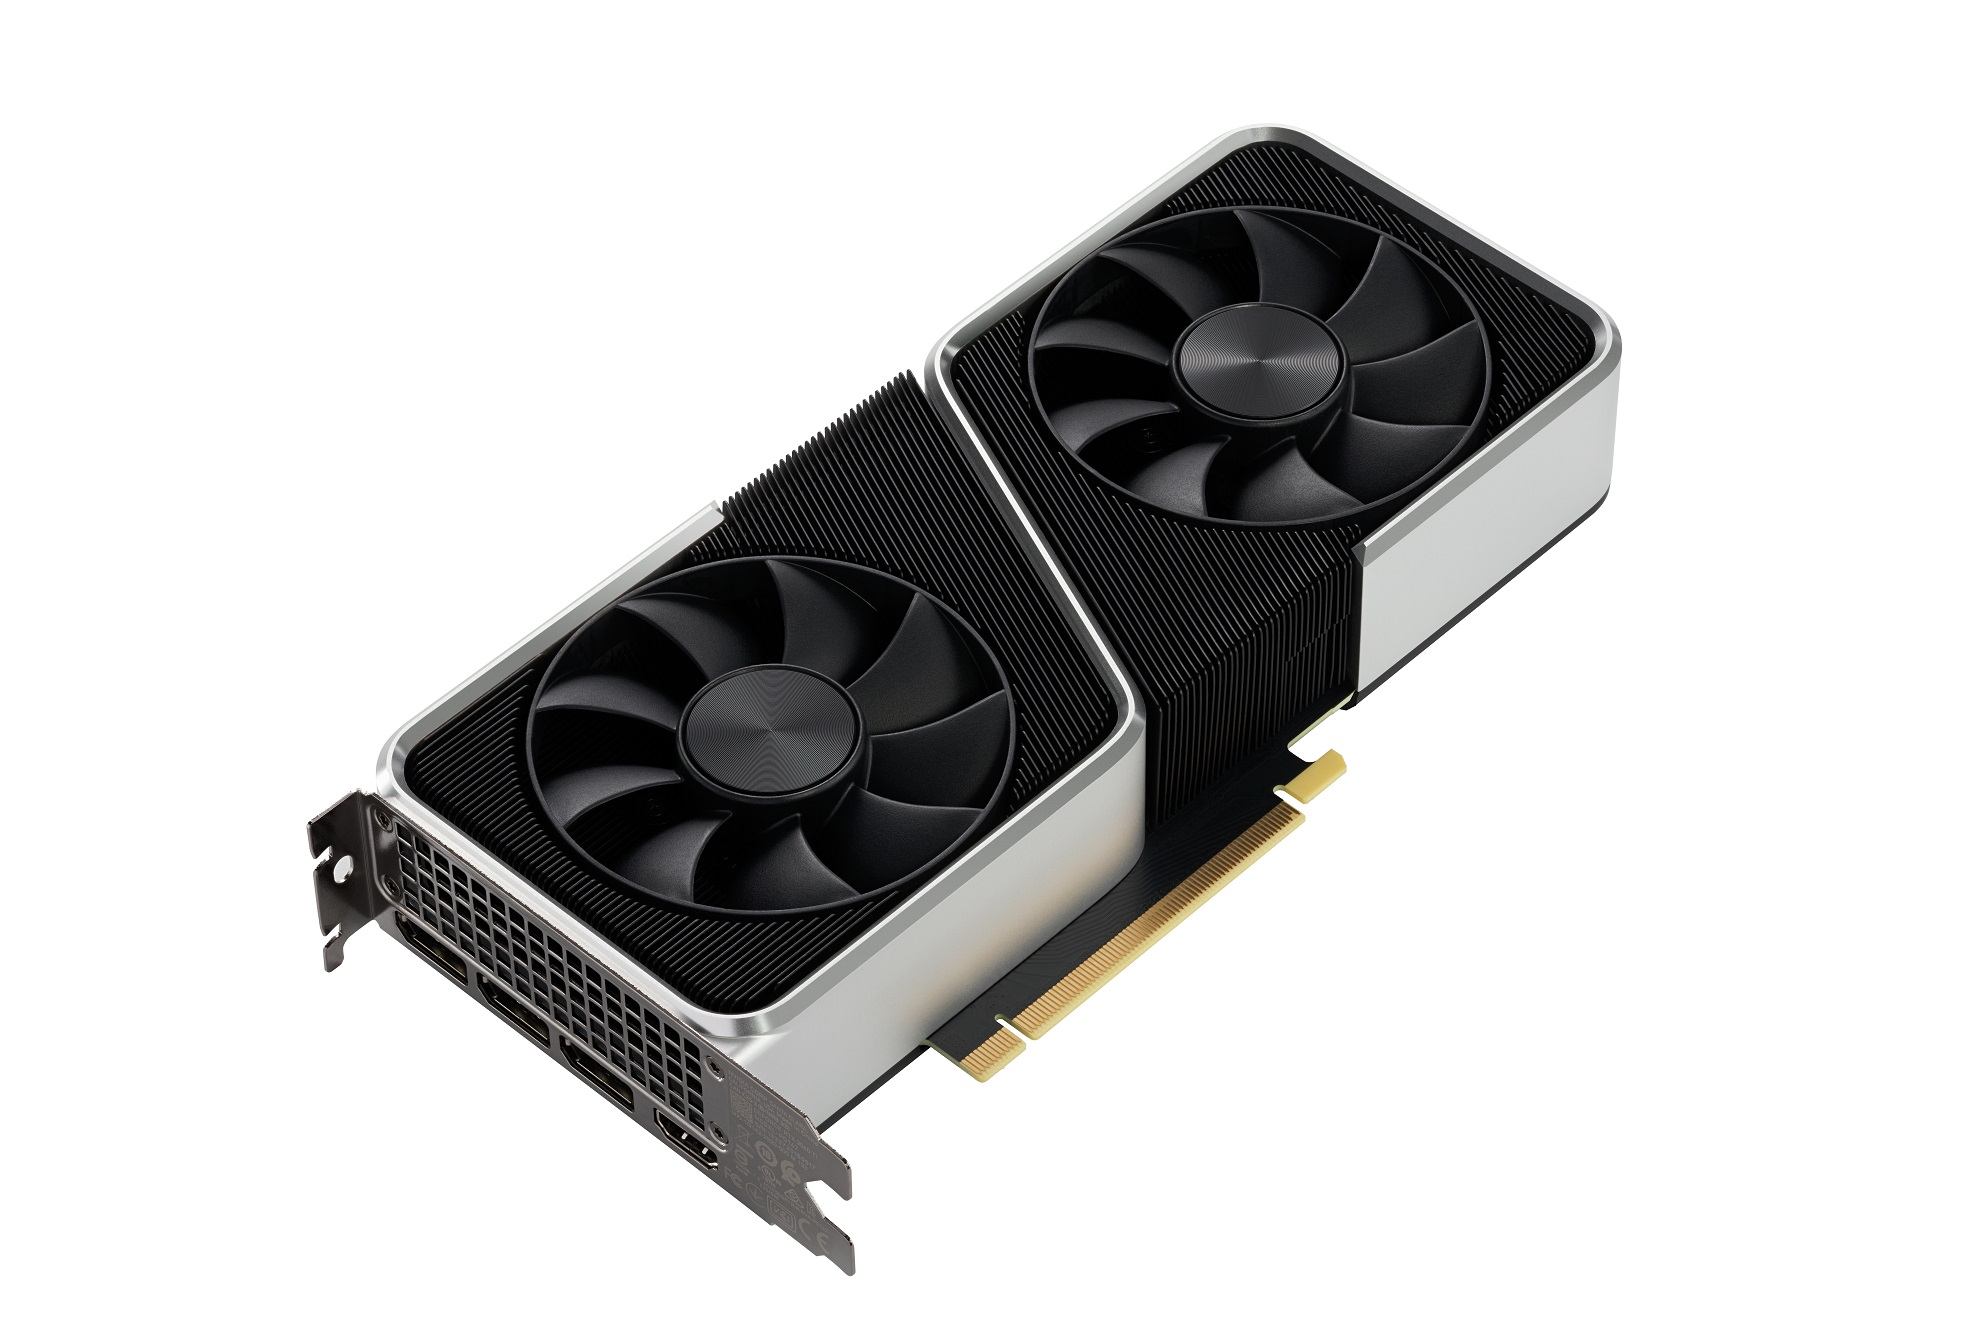 Official Nvidia Geforce RTX 3060 Ti Ampere GPU gaming benchmarks leaked,  faster than the RTX 2080 SUPER